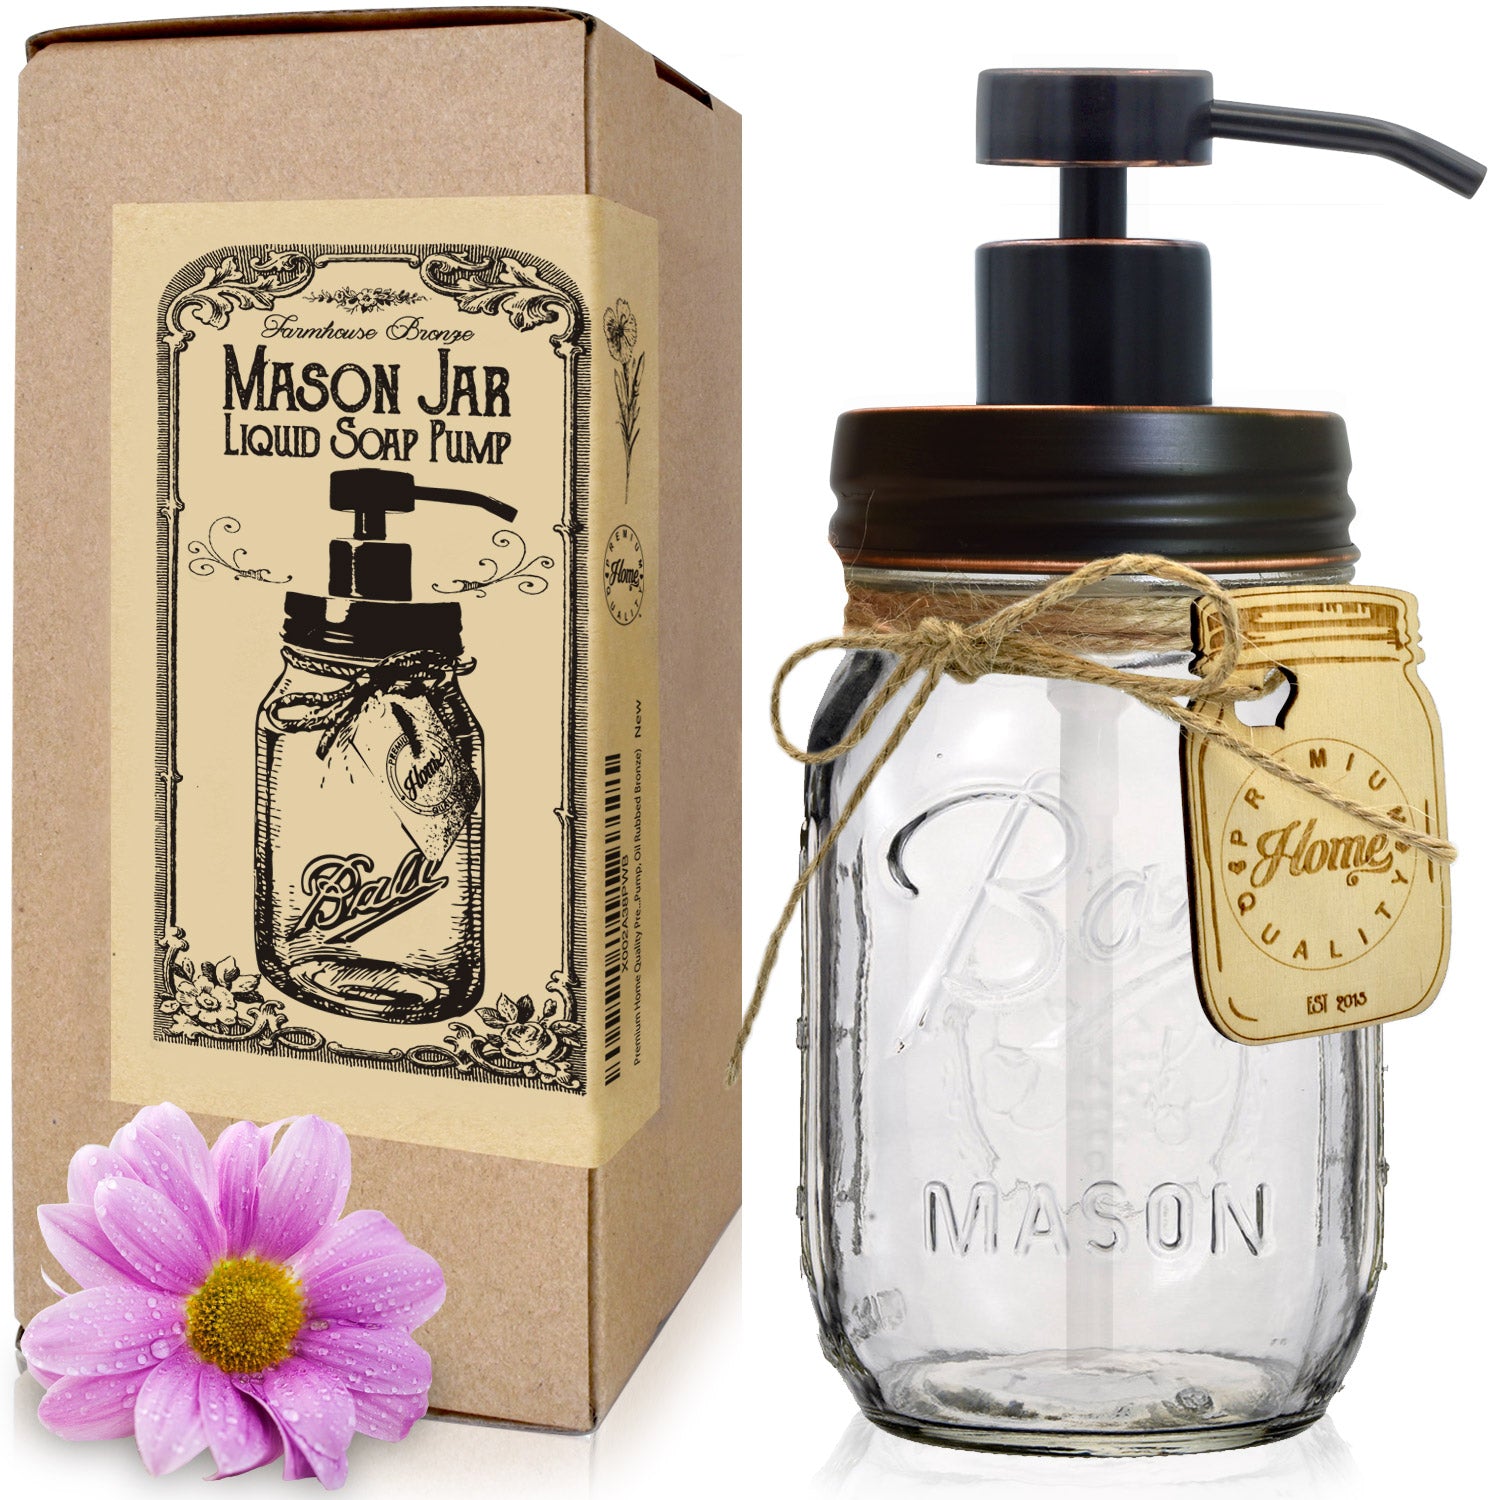 Bronze Mason Jar Soap Dispenser - Stainless Steel Pump for Liquid Dish, Hand Soap or Lotions - Includes Iconic, Vintage 16 oz Made in the USA, Glass Mason Jar - Kitchen or Bathroom (Oil Rubbed Bronze)